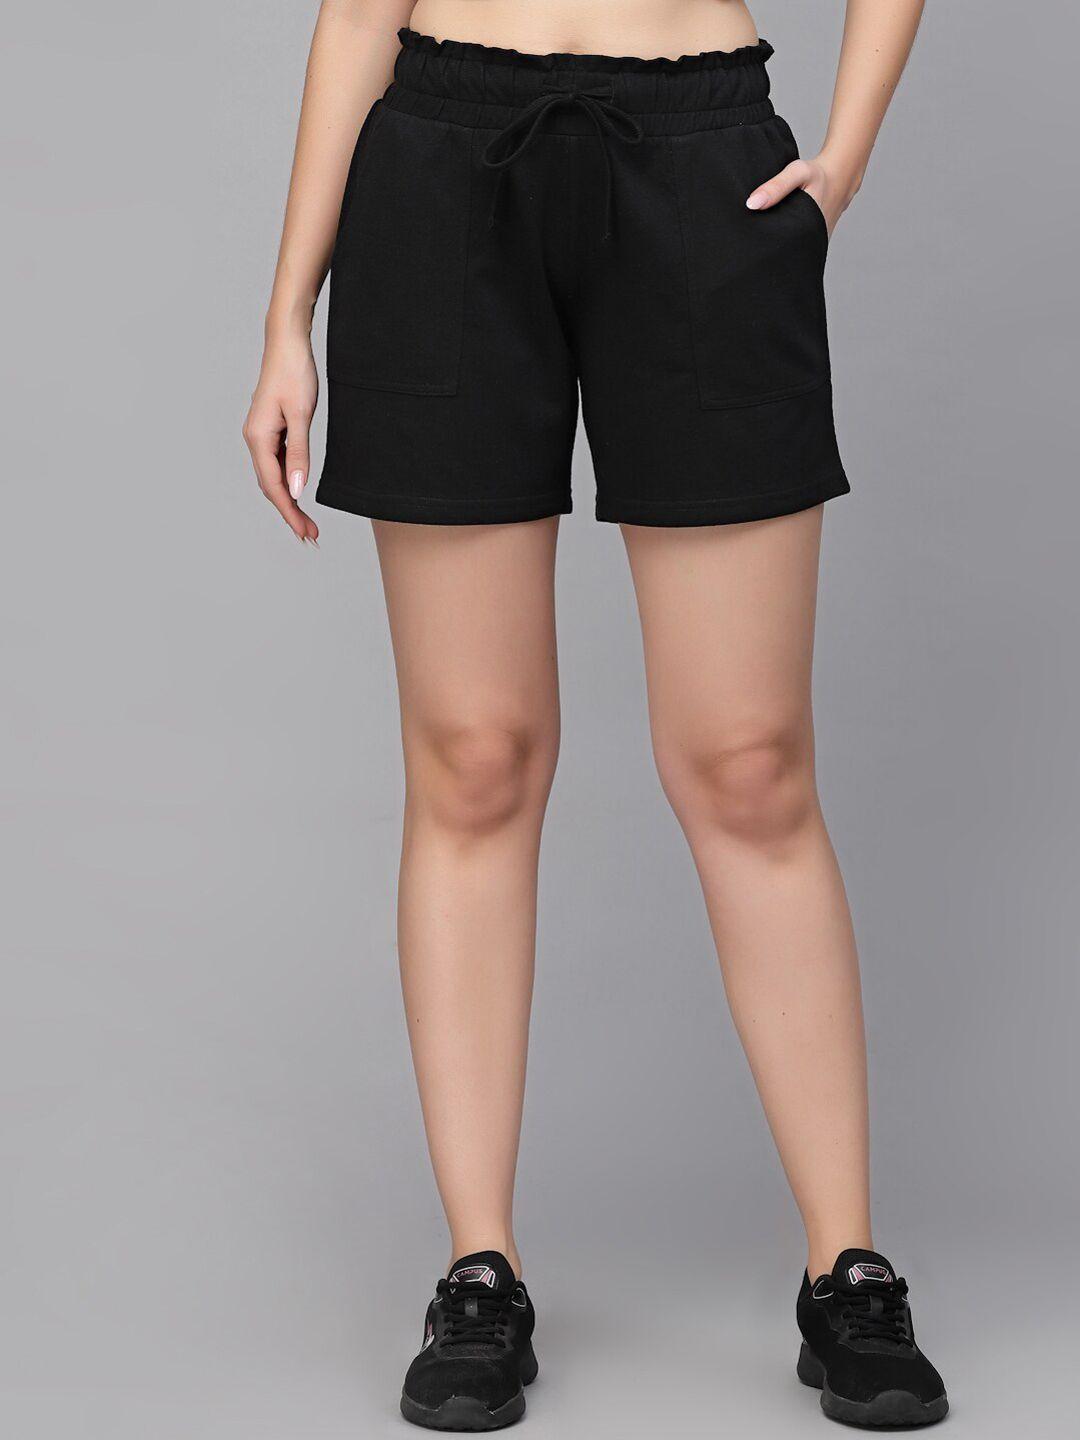 strong and brave women odour free cotton mid-rise shorts